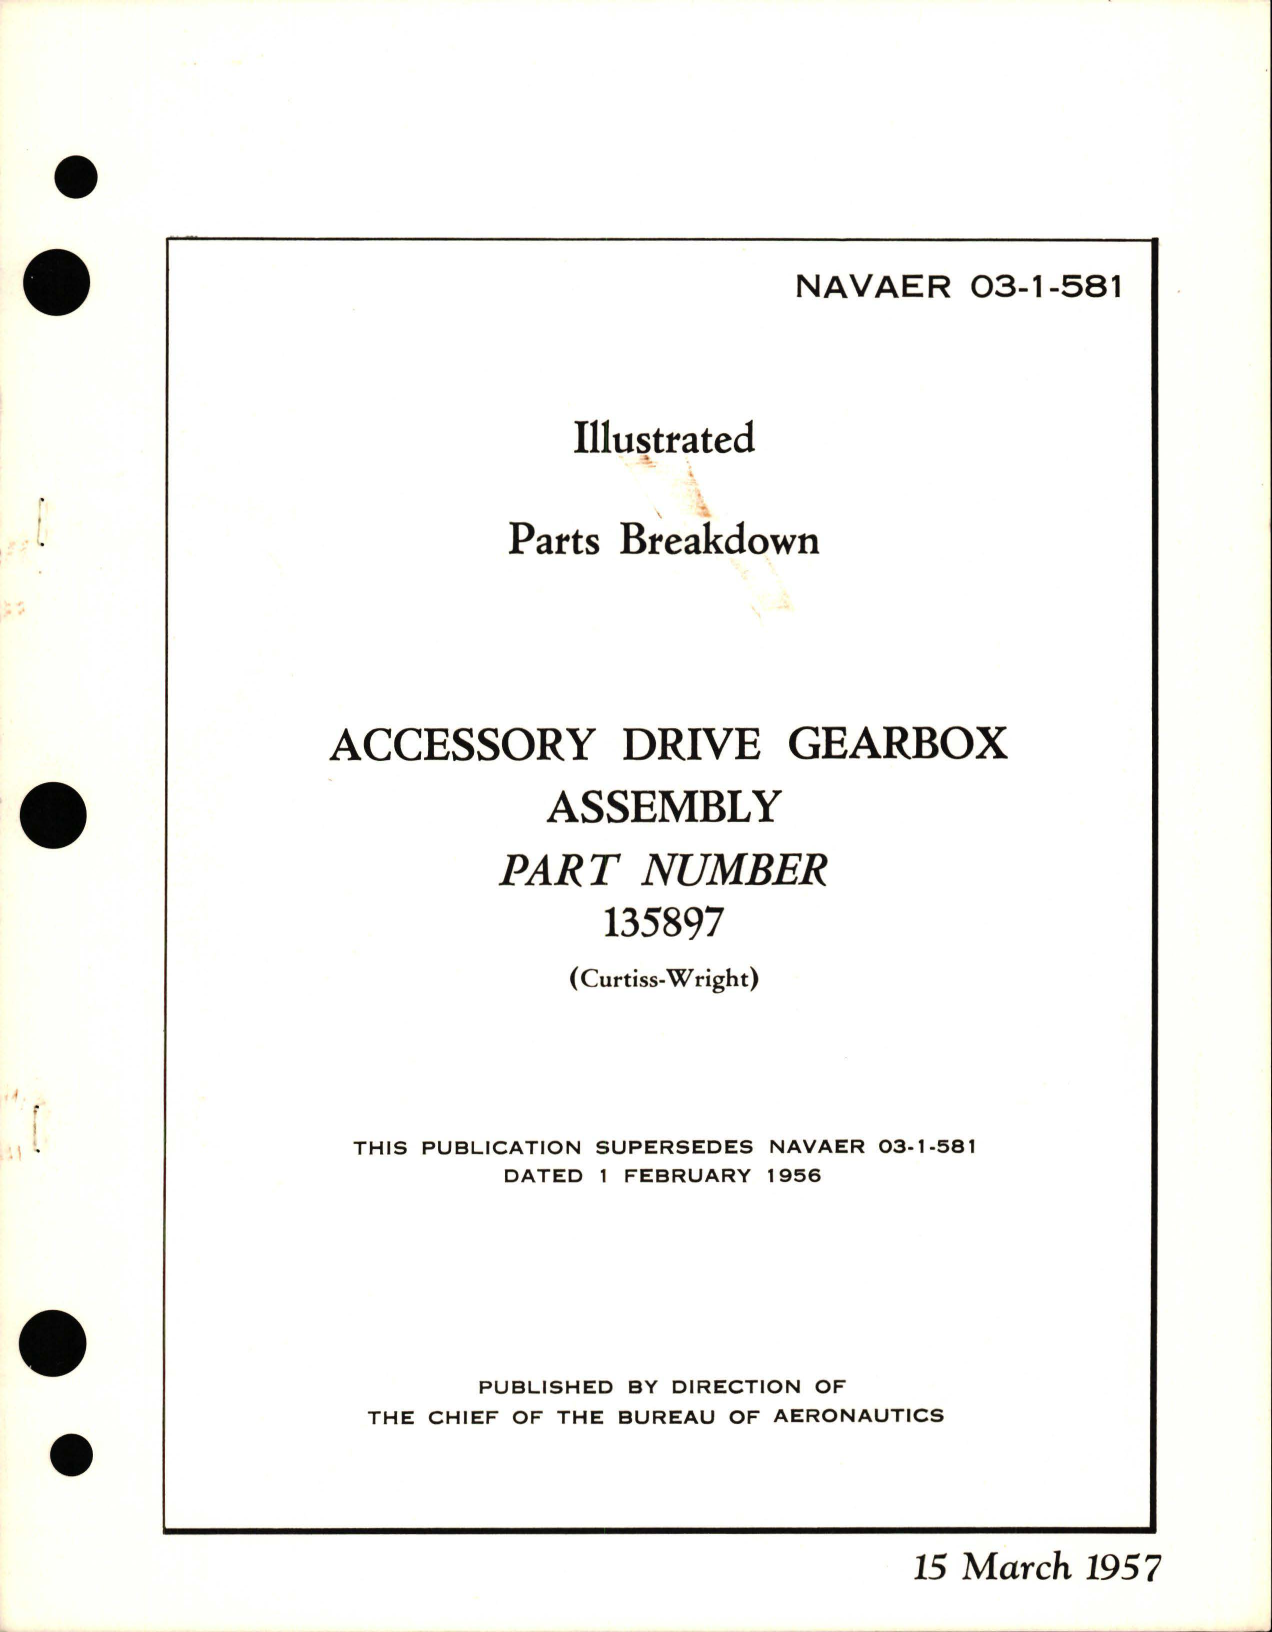 Sample page 1 from AirCorps Library document: Illustrated Parts Breakdown for Accessory Drive Gearbox Assembly - Part 135597 